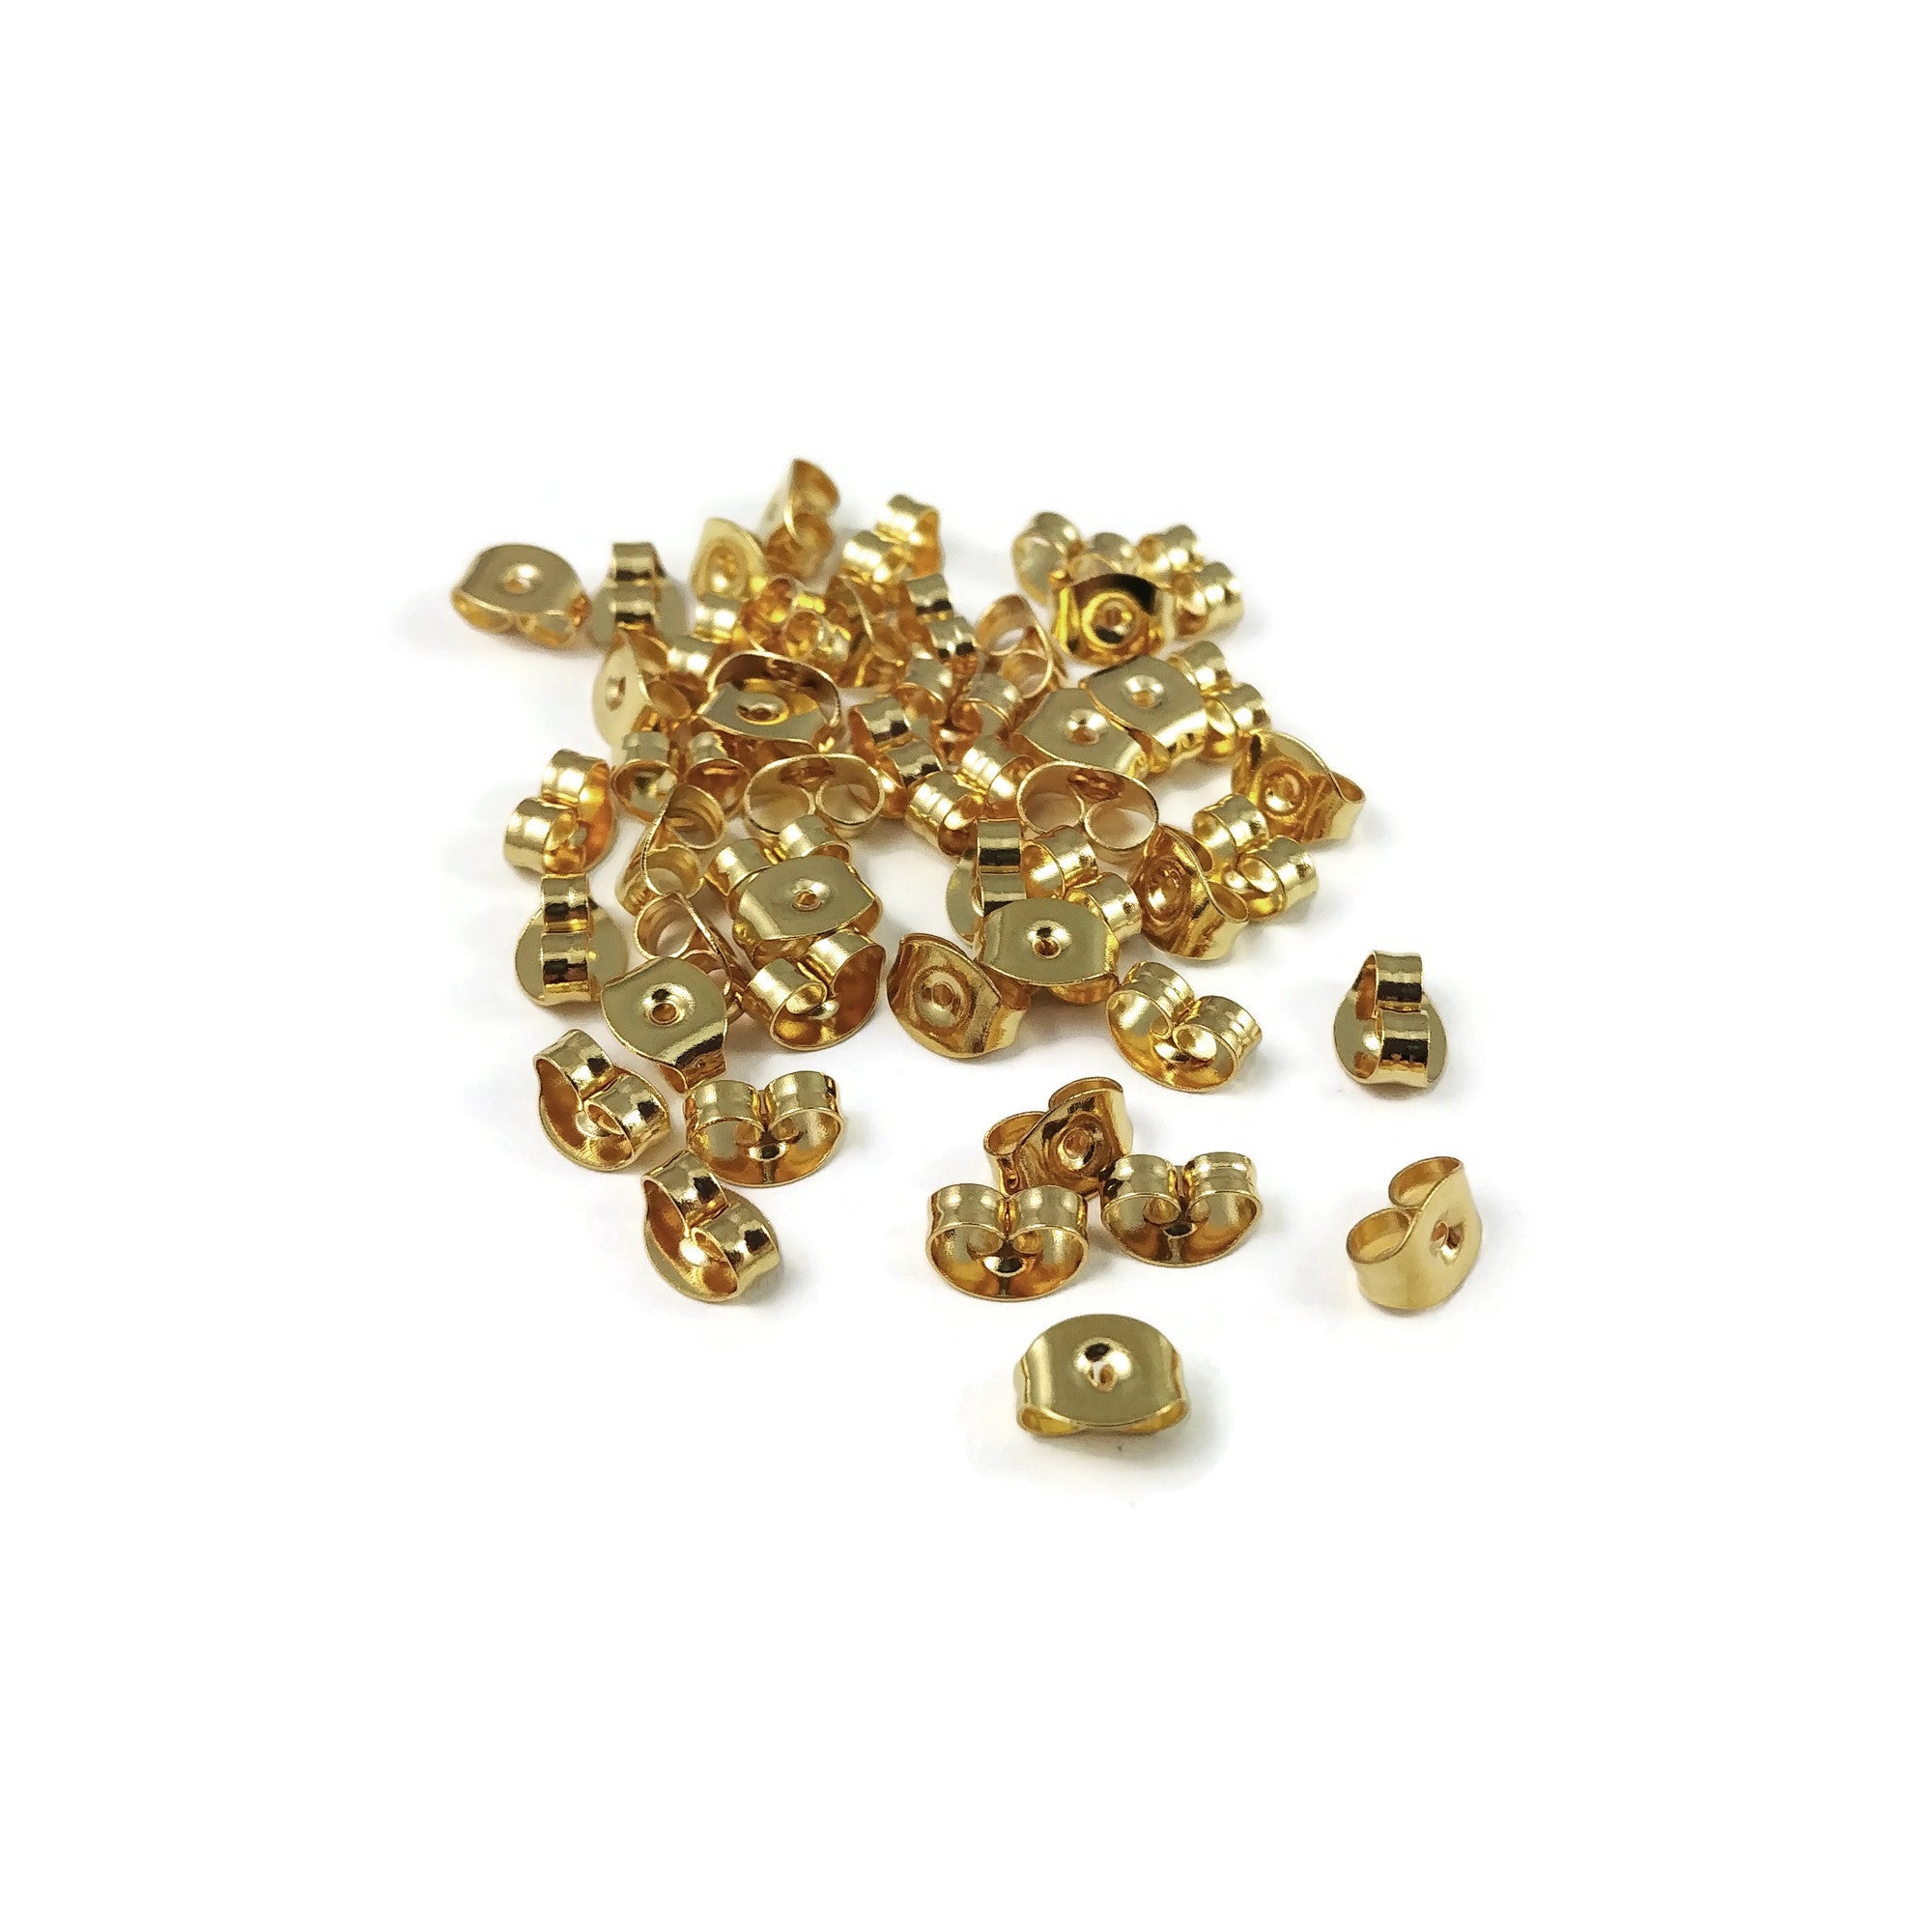 8mm gold plated metal flat pad earring posts, 24 pcs. (12 pair) – My  Supplies Source